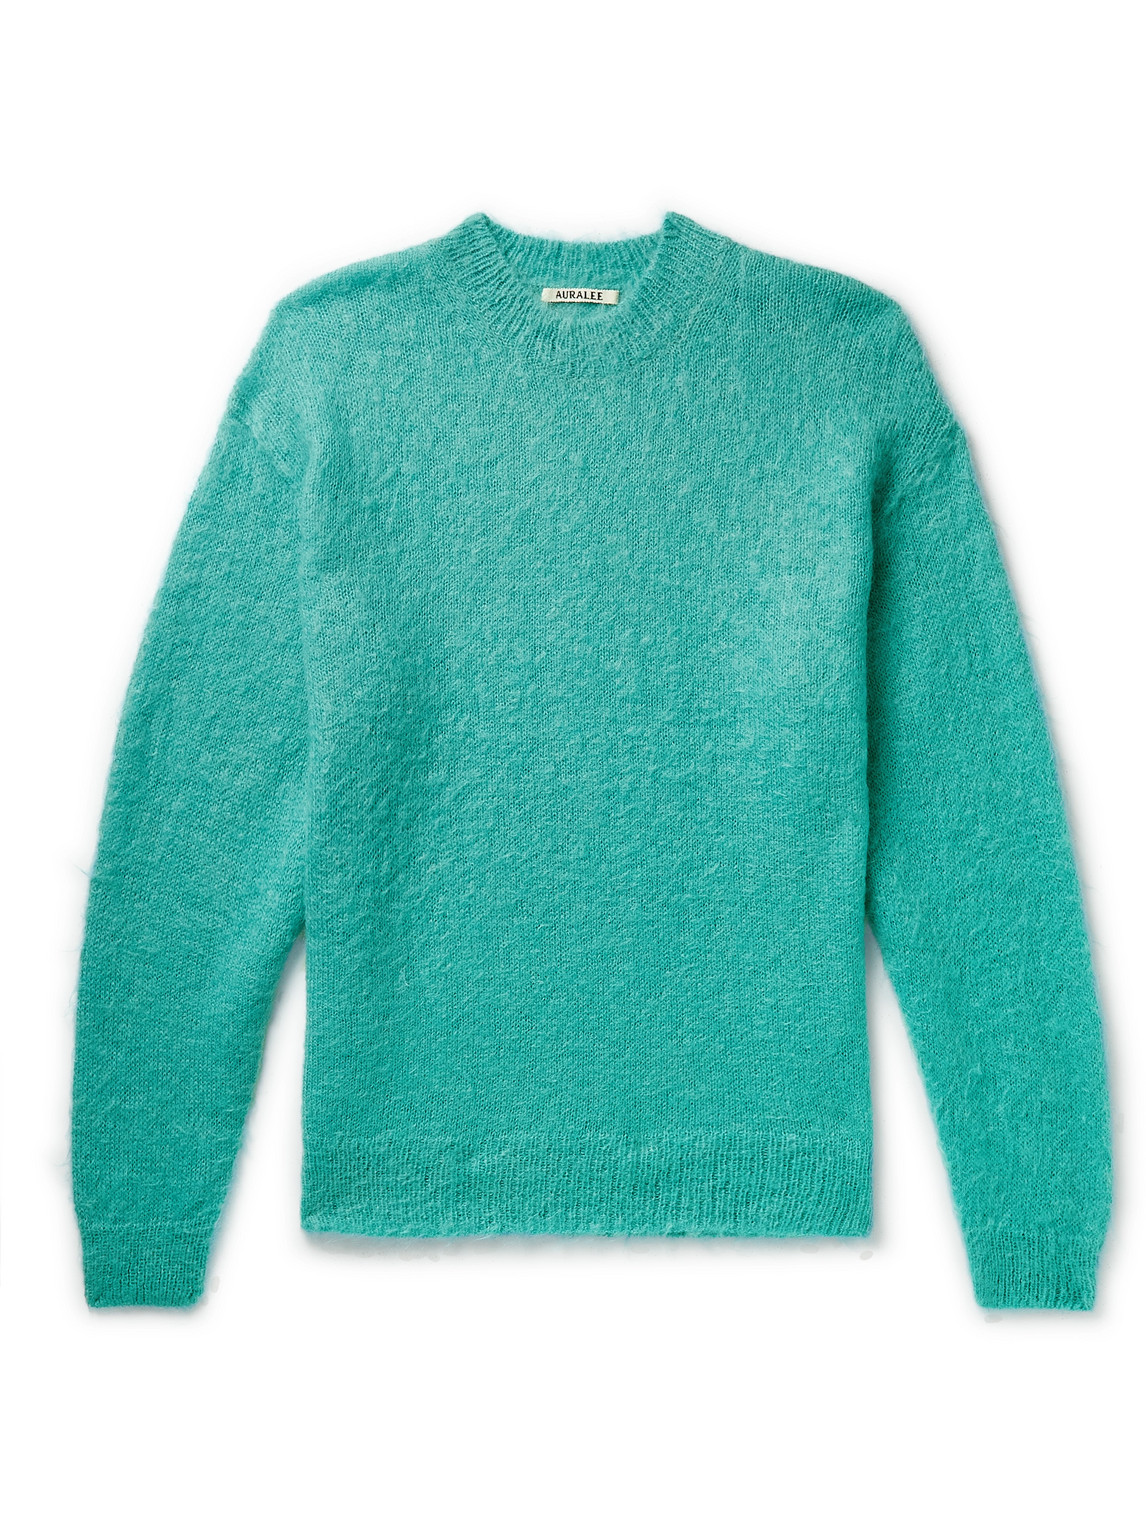 Auralee Brushed Mohair and Wool-Blend Sweater